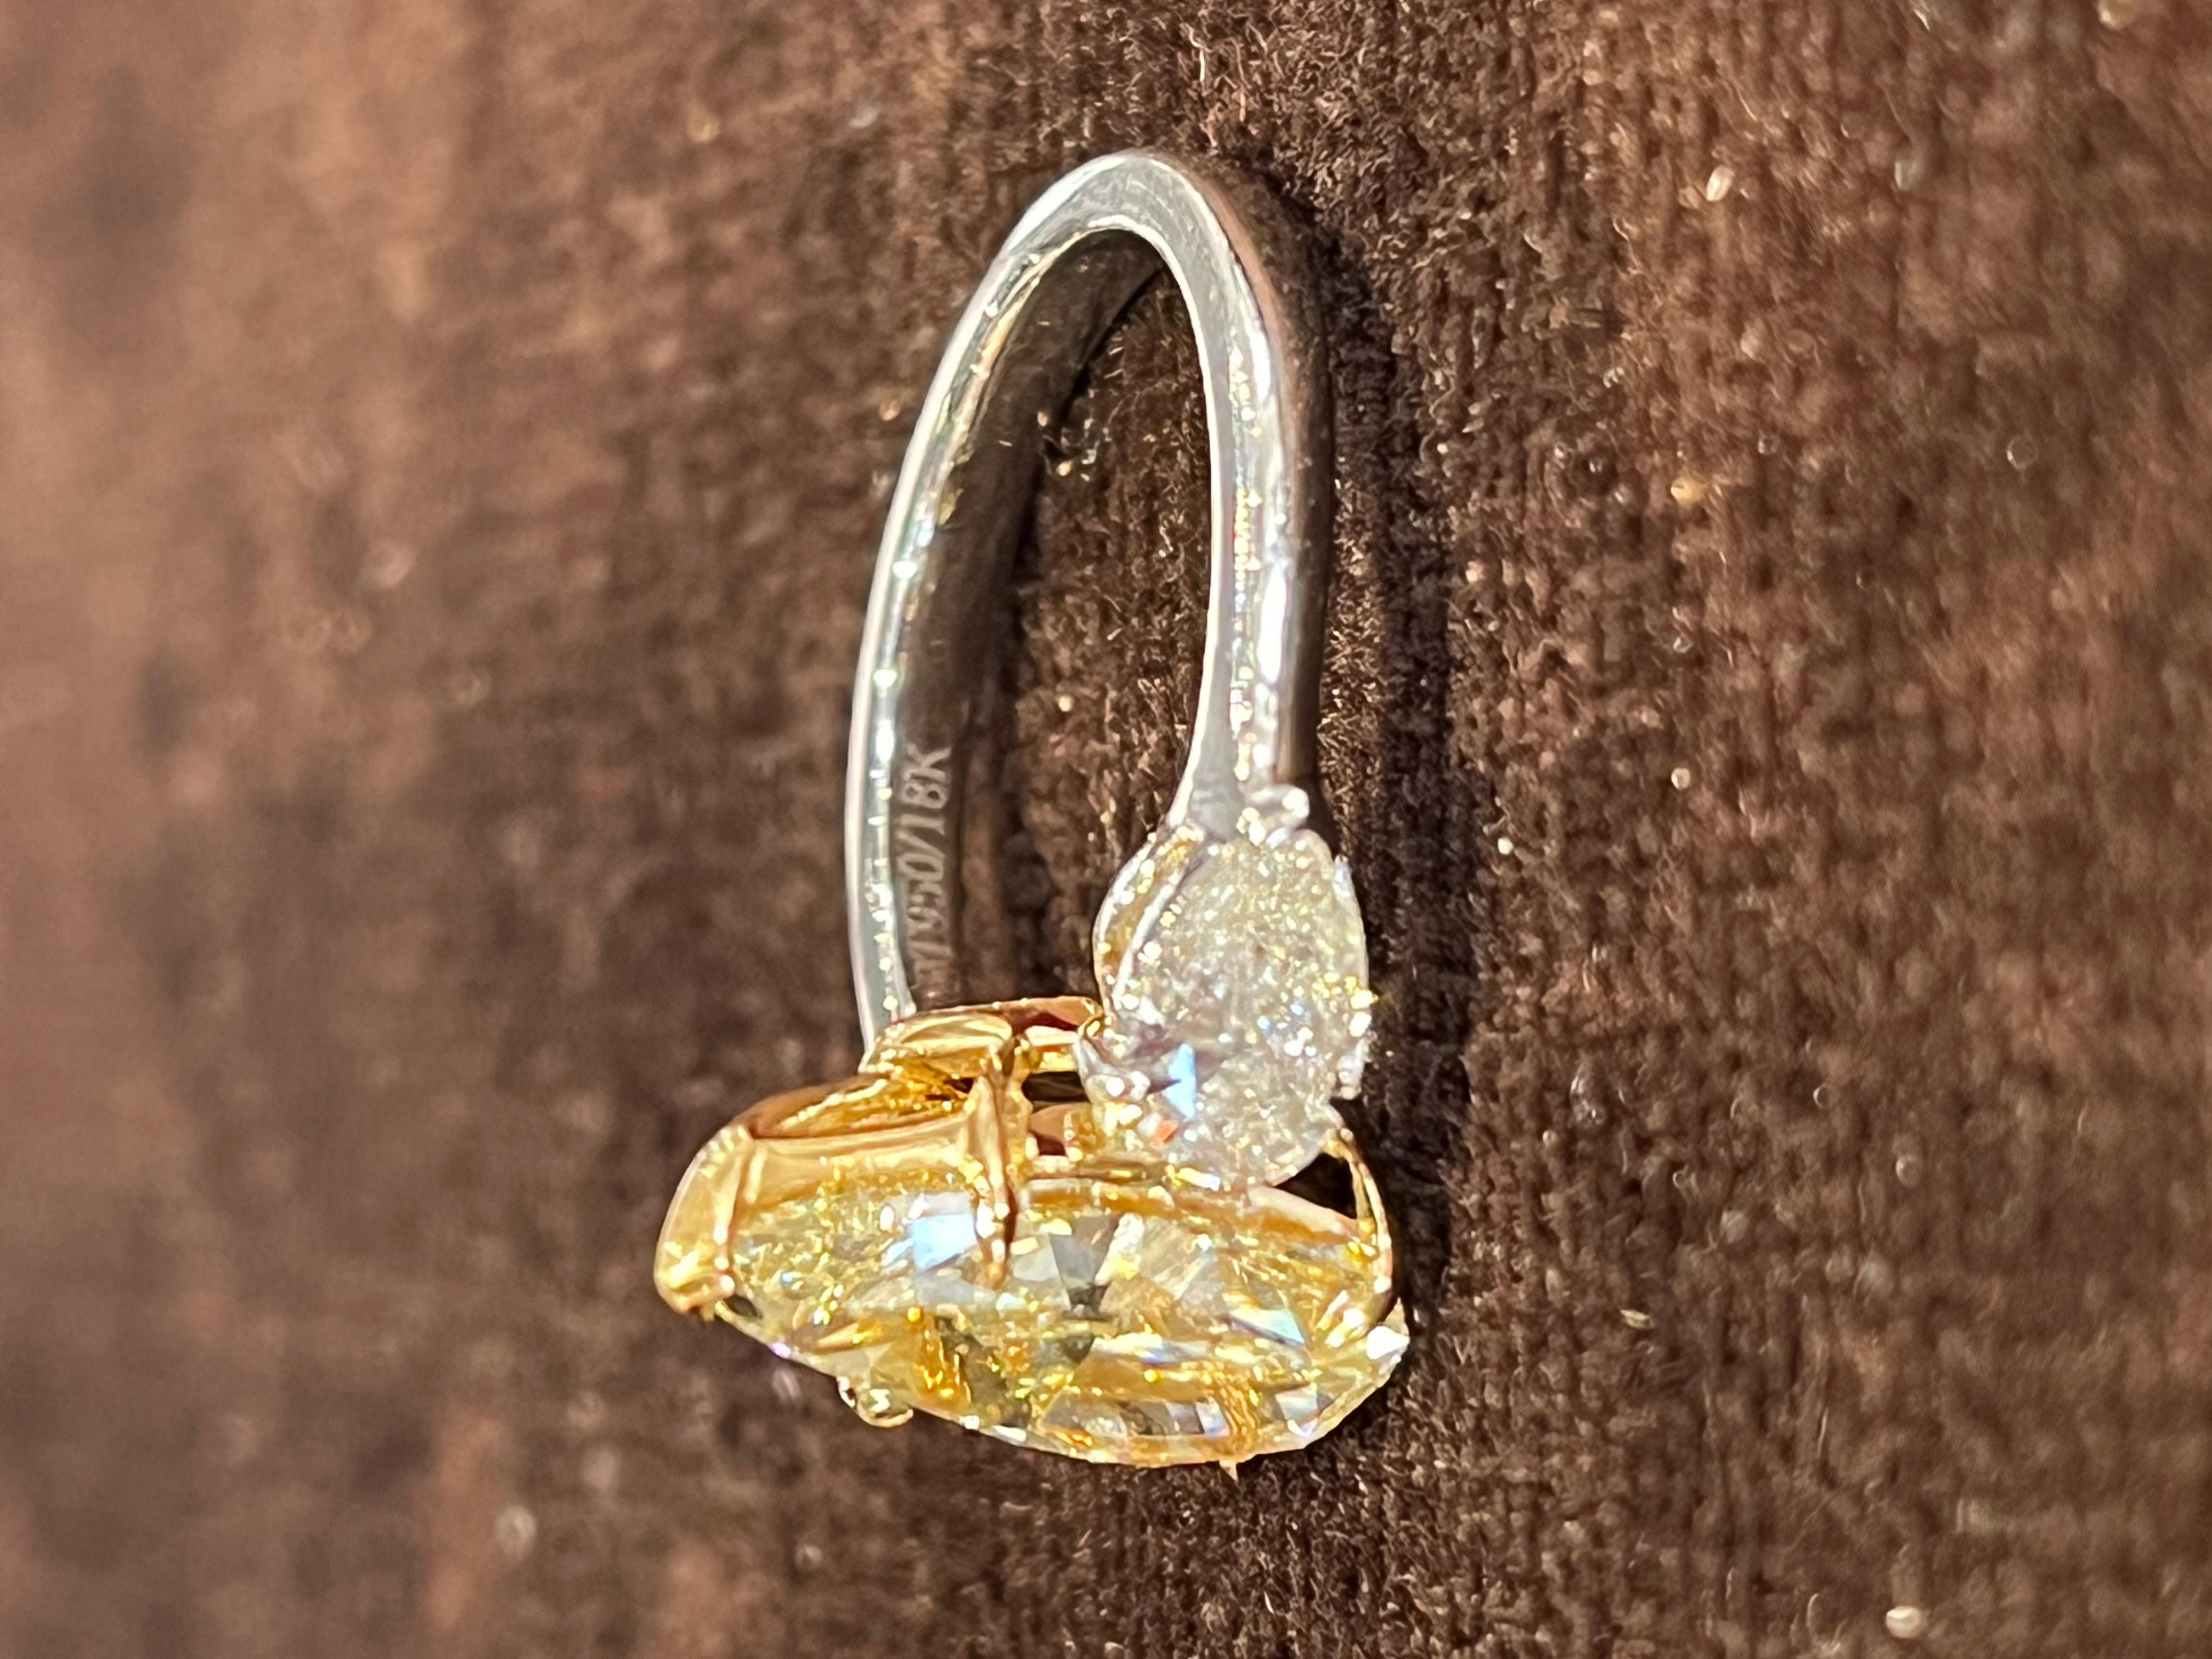 Pear Cut GIA 4.01cts Yellow Diamond Engagement Ring set in Platinum 950 and 18K Gold For Sale